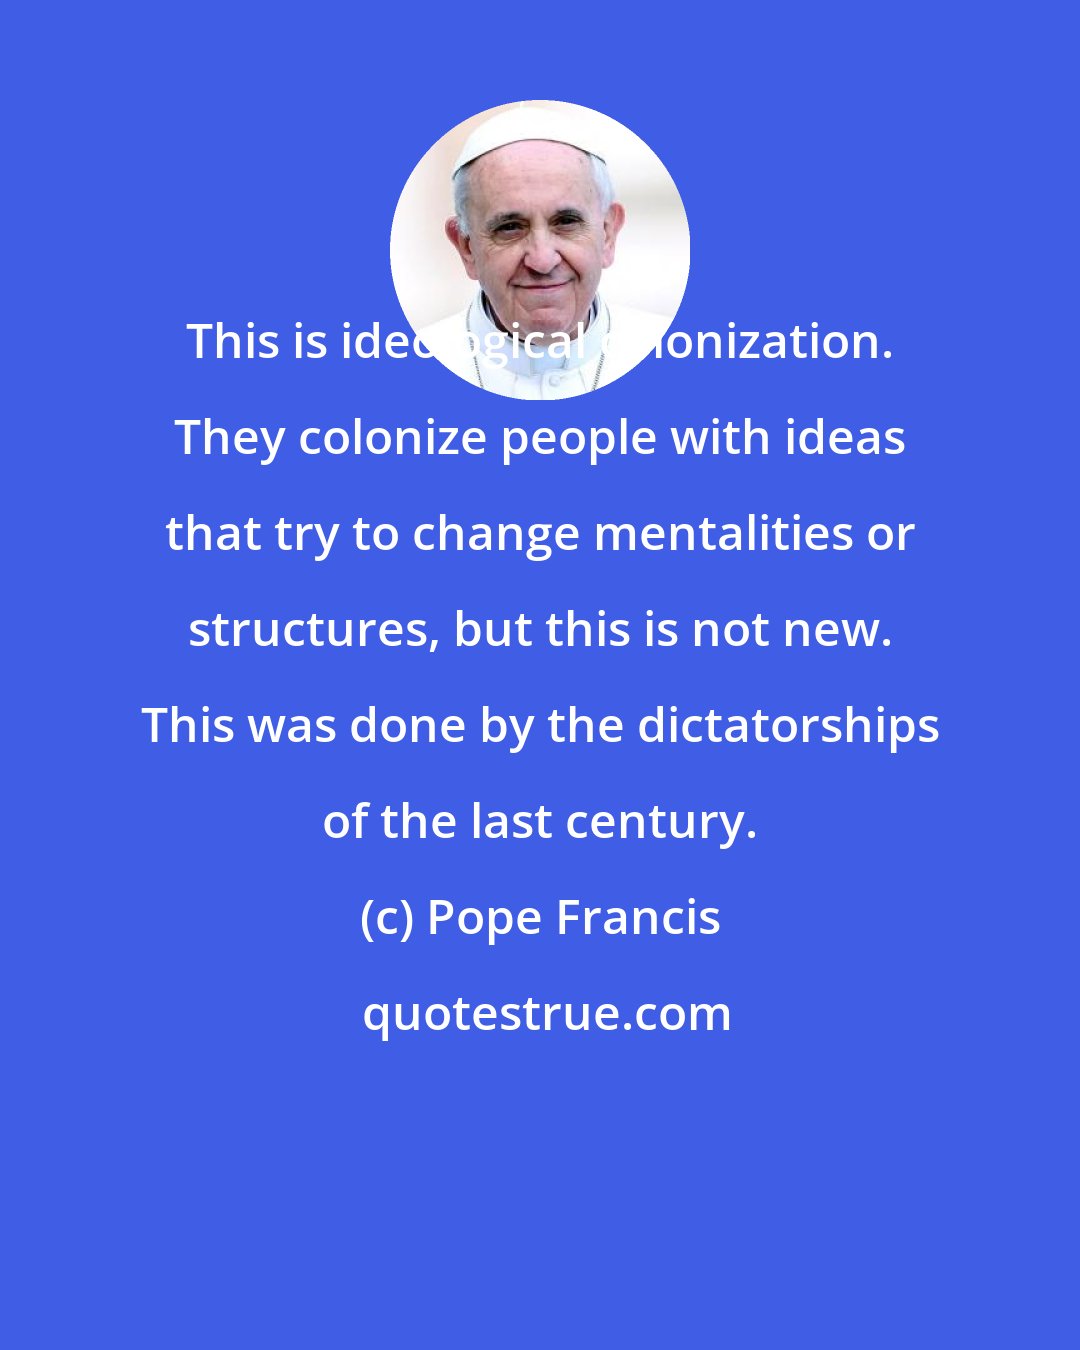 Pope Francis: This is ideological colonization. They colonize people with ideas that try to change mentalities or structures, but this is not new. This was done by the dictatorships of the last century.